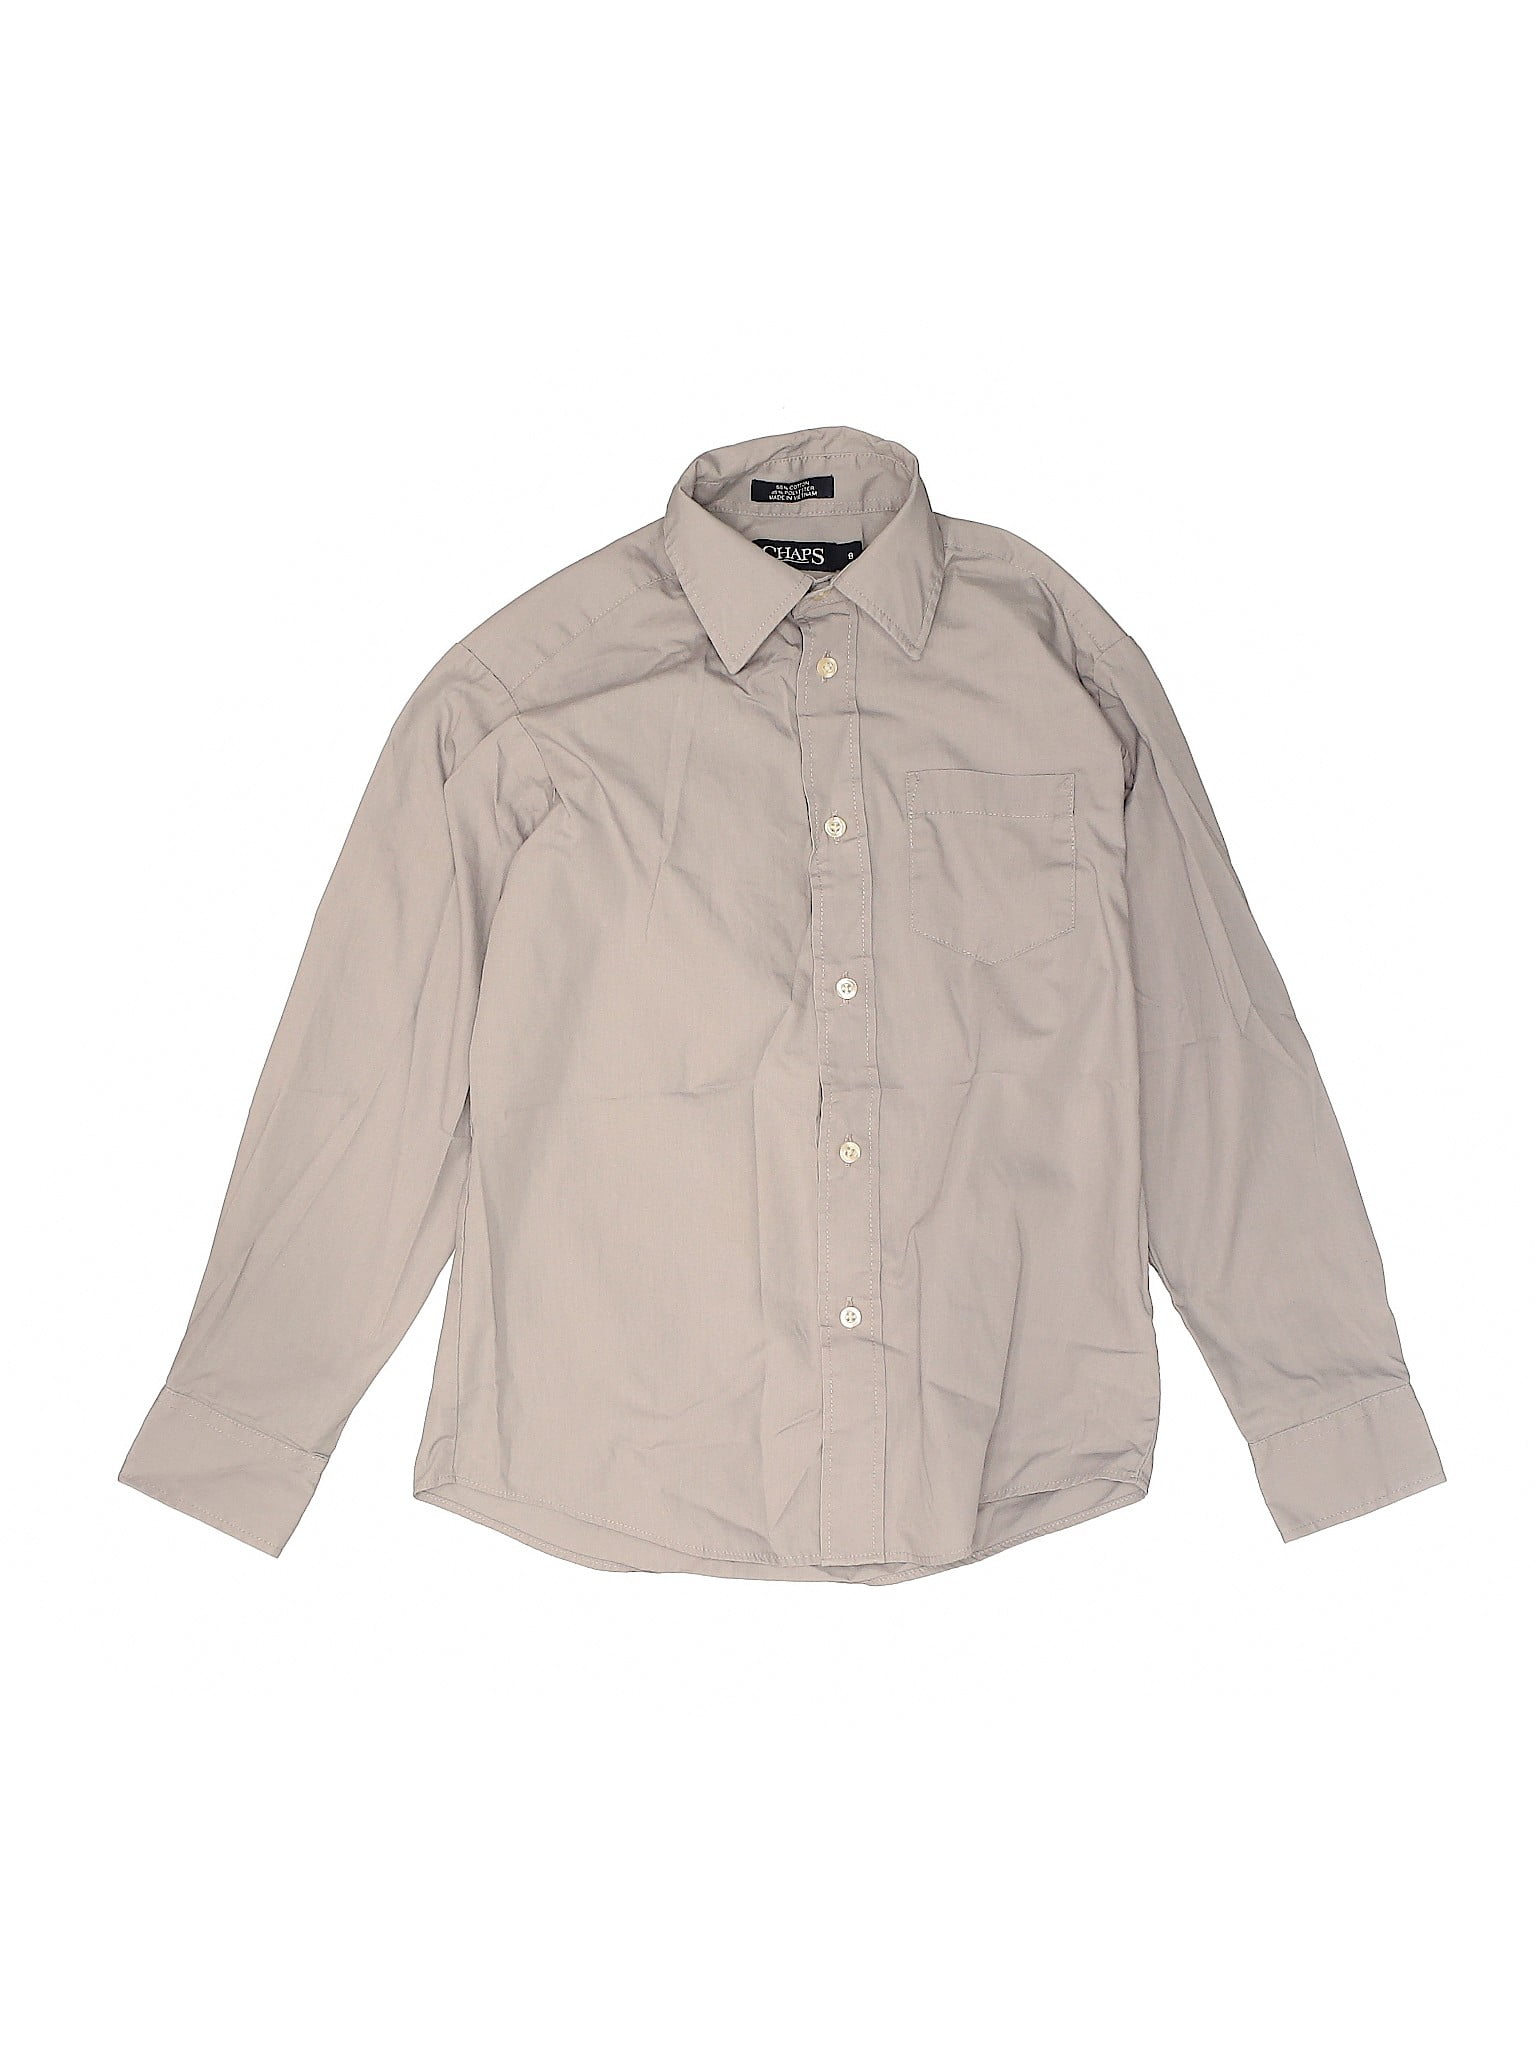 Chaps - Pre-Owned Chaps Boy's Size 8 Long Sleeve Button-Down Shirt ...